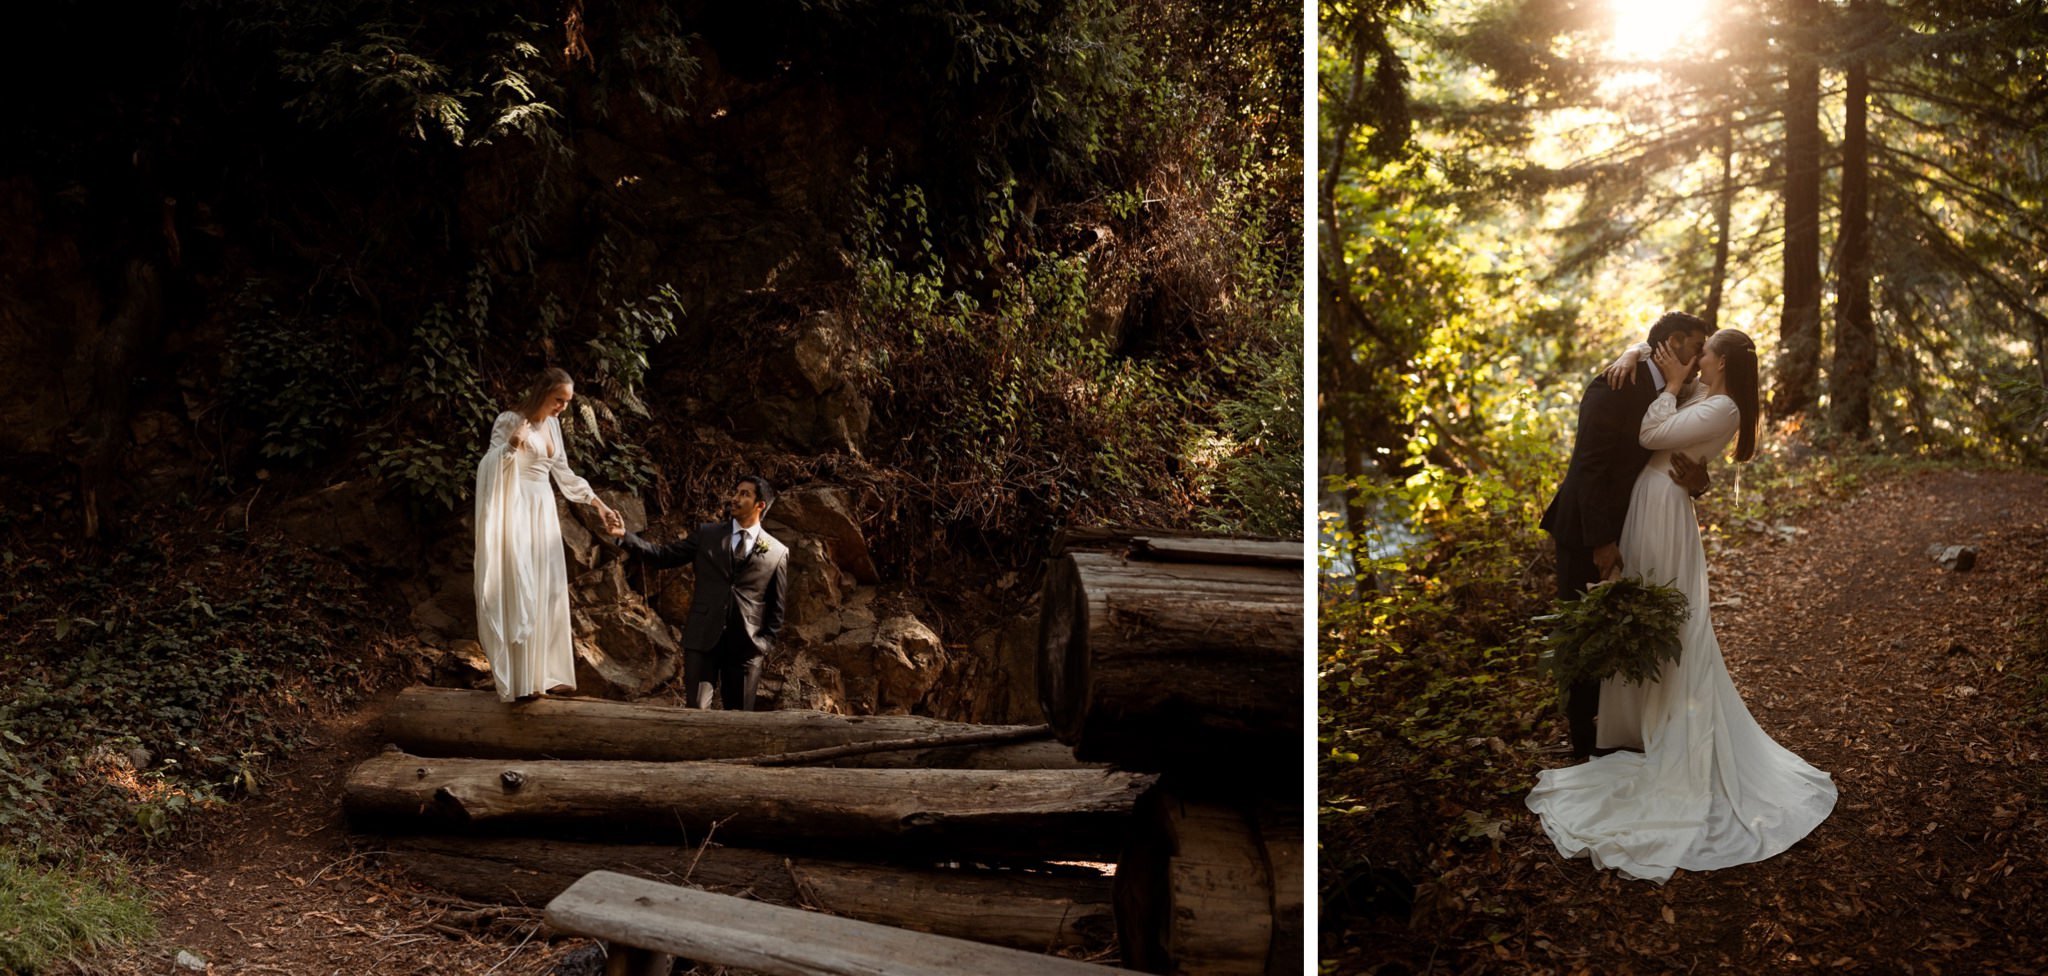 029_Two-Day Big Sur Redwoods Elopement with Family_Will Khoury Elopement Photographer.jpg